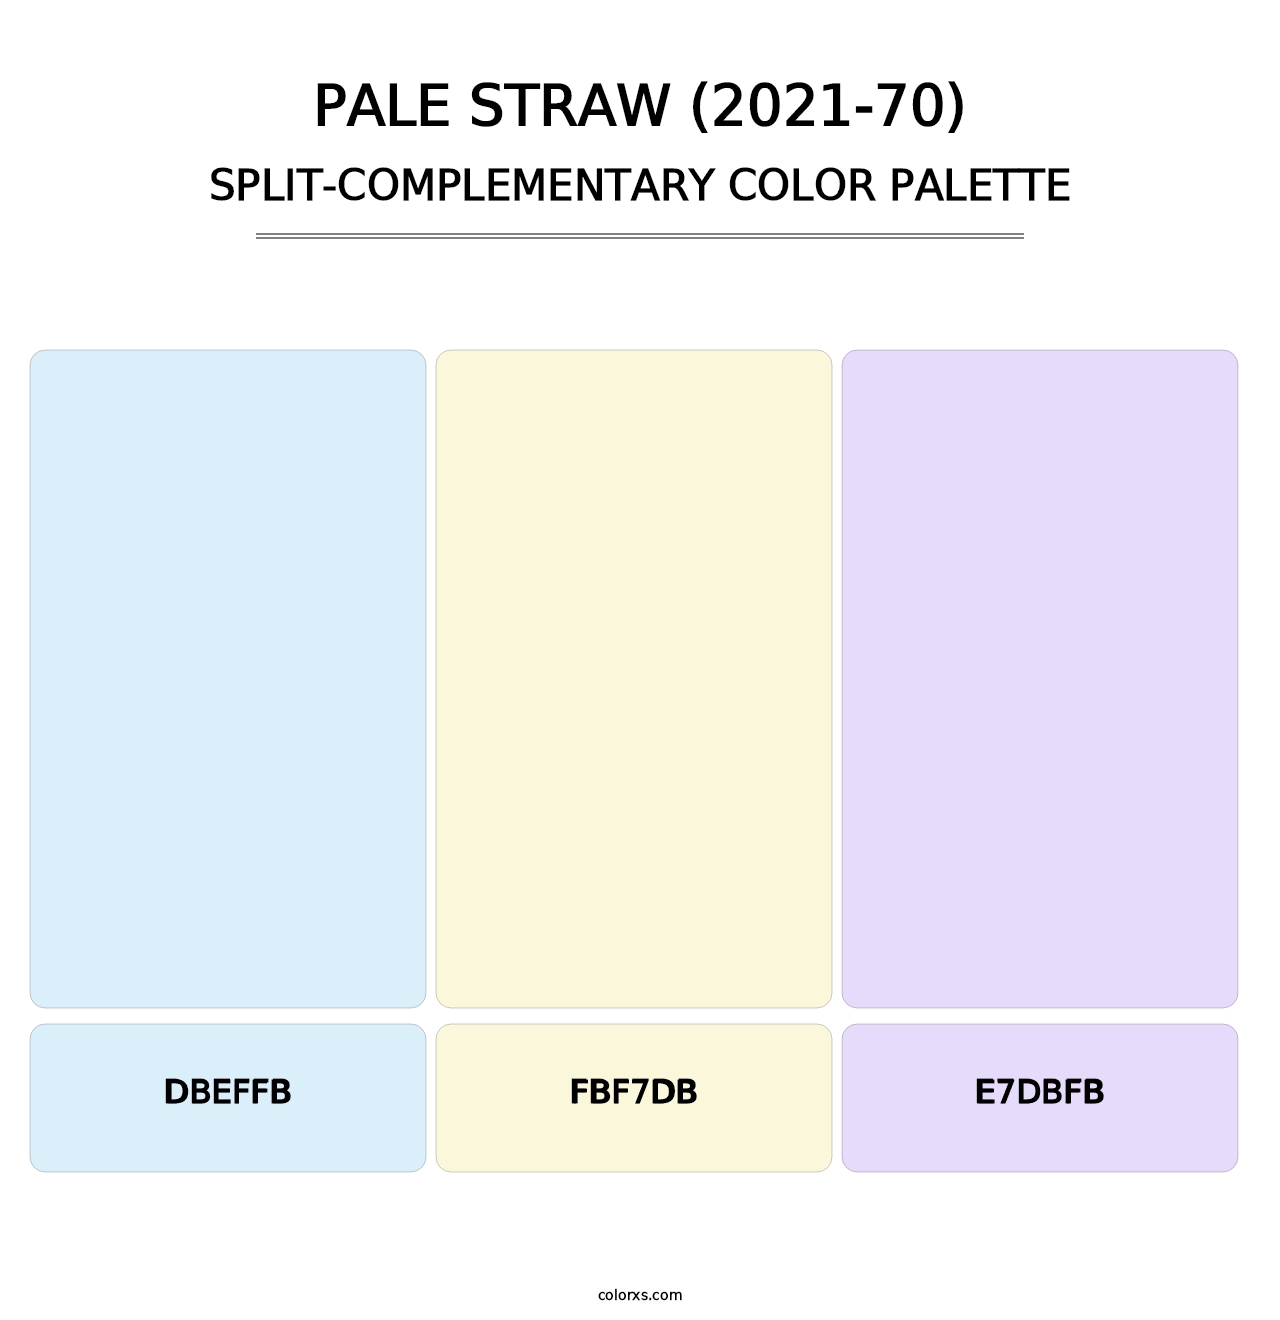 Pale Straw (2021-70) - Split-Complementary Color Palette